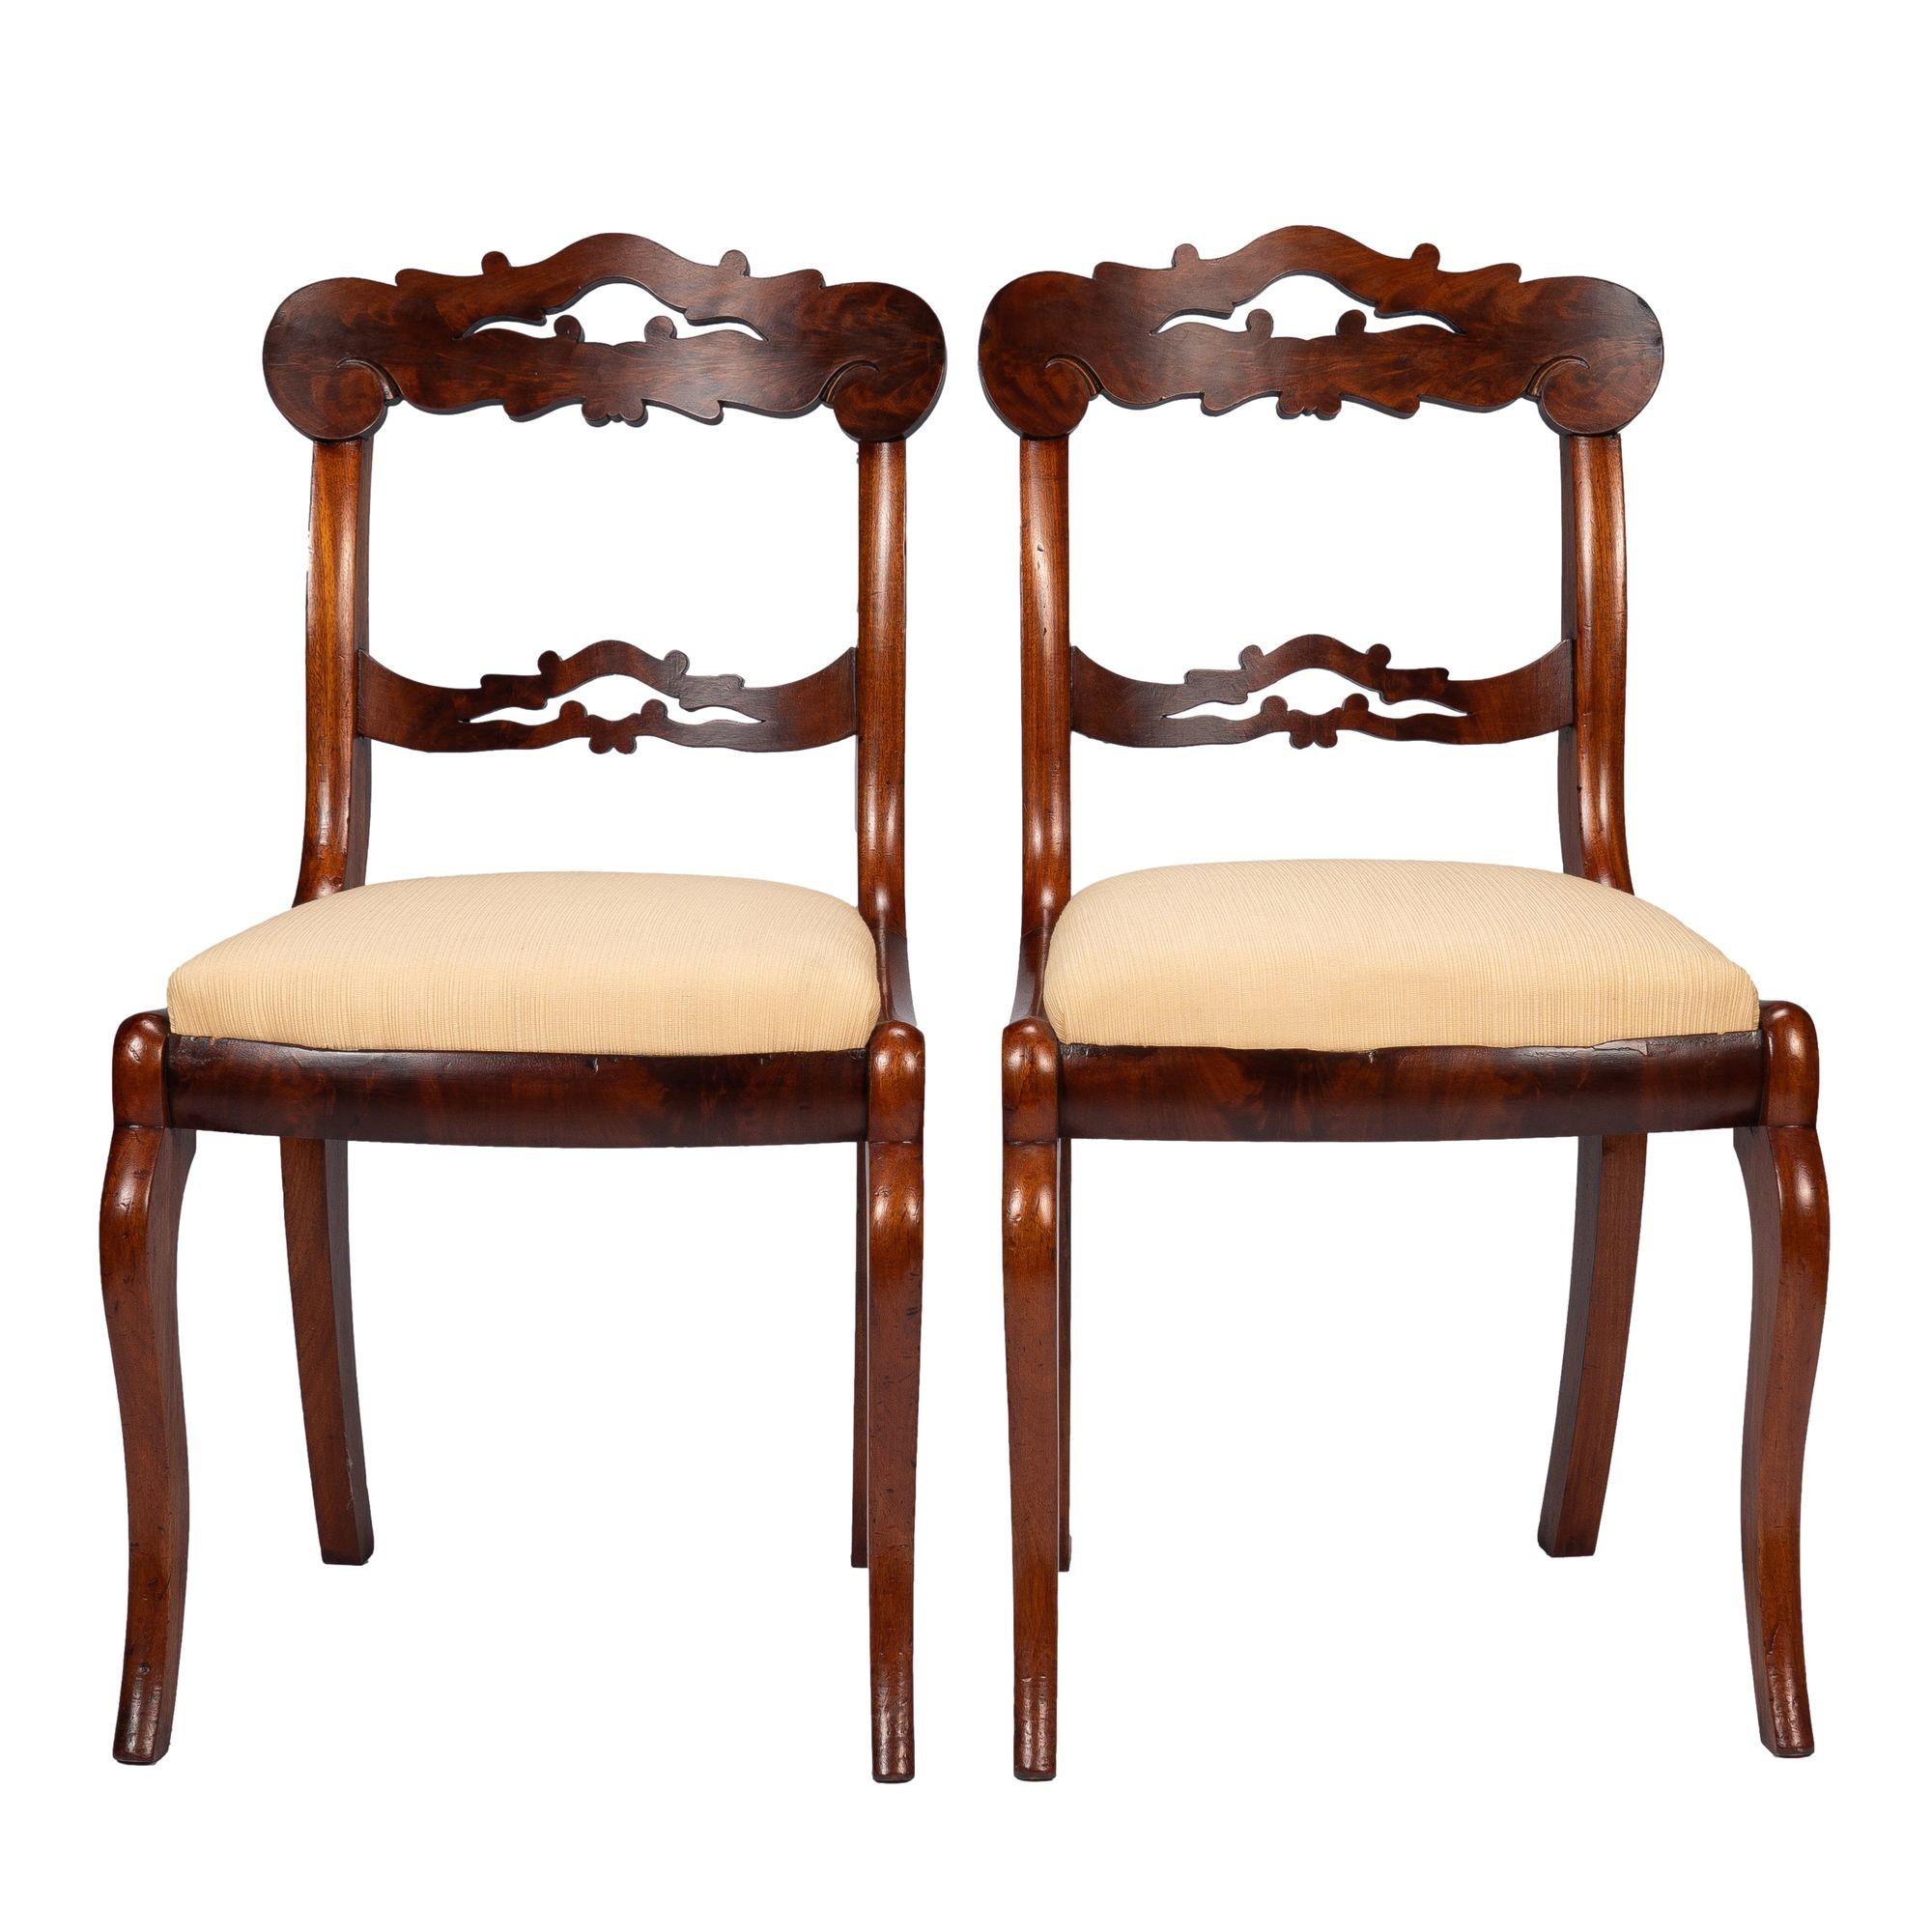 American Classical Pair of Boston late Classical slip seat mahogany side chairs, 1830-45 For Sale